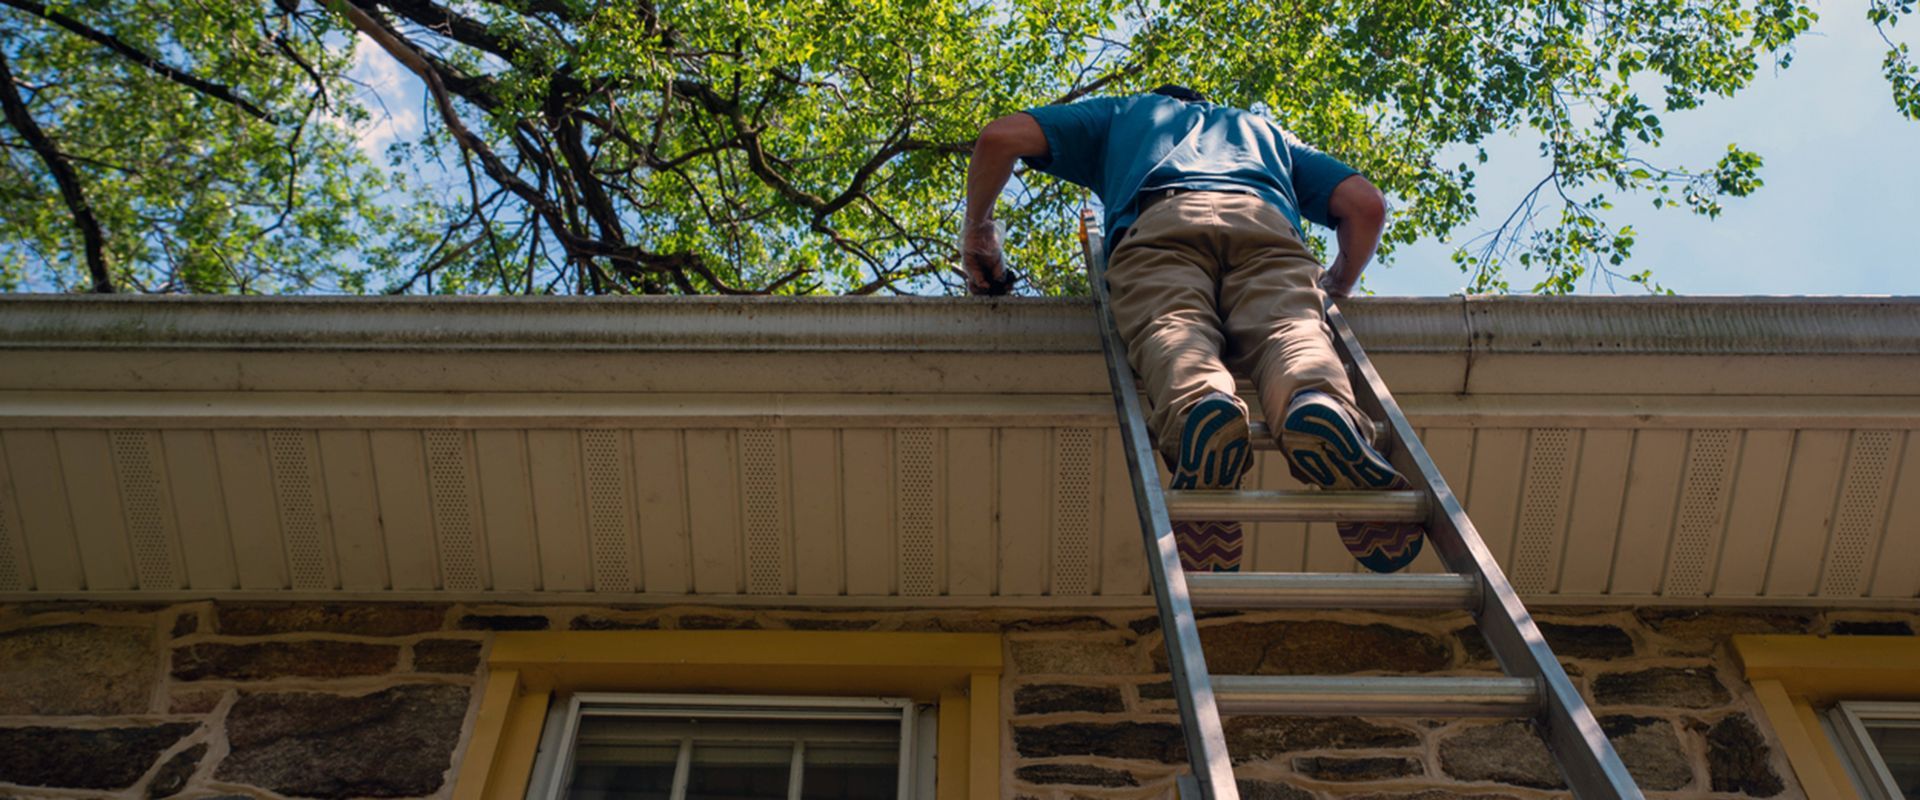 Essential Warm Weather Tasks & Tips Around the House, Gutter Cleaning